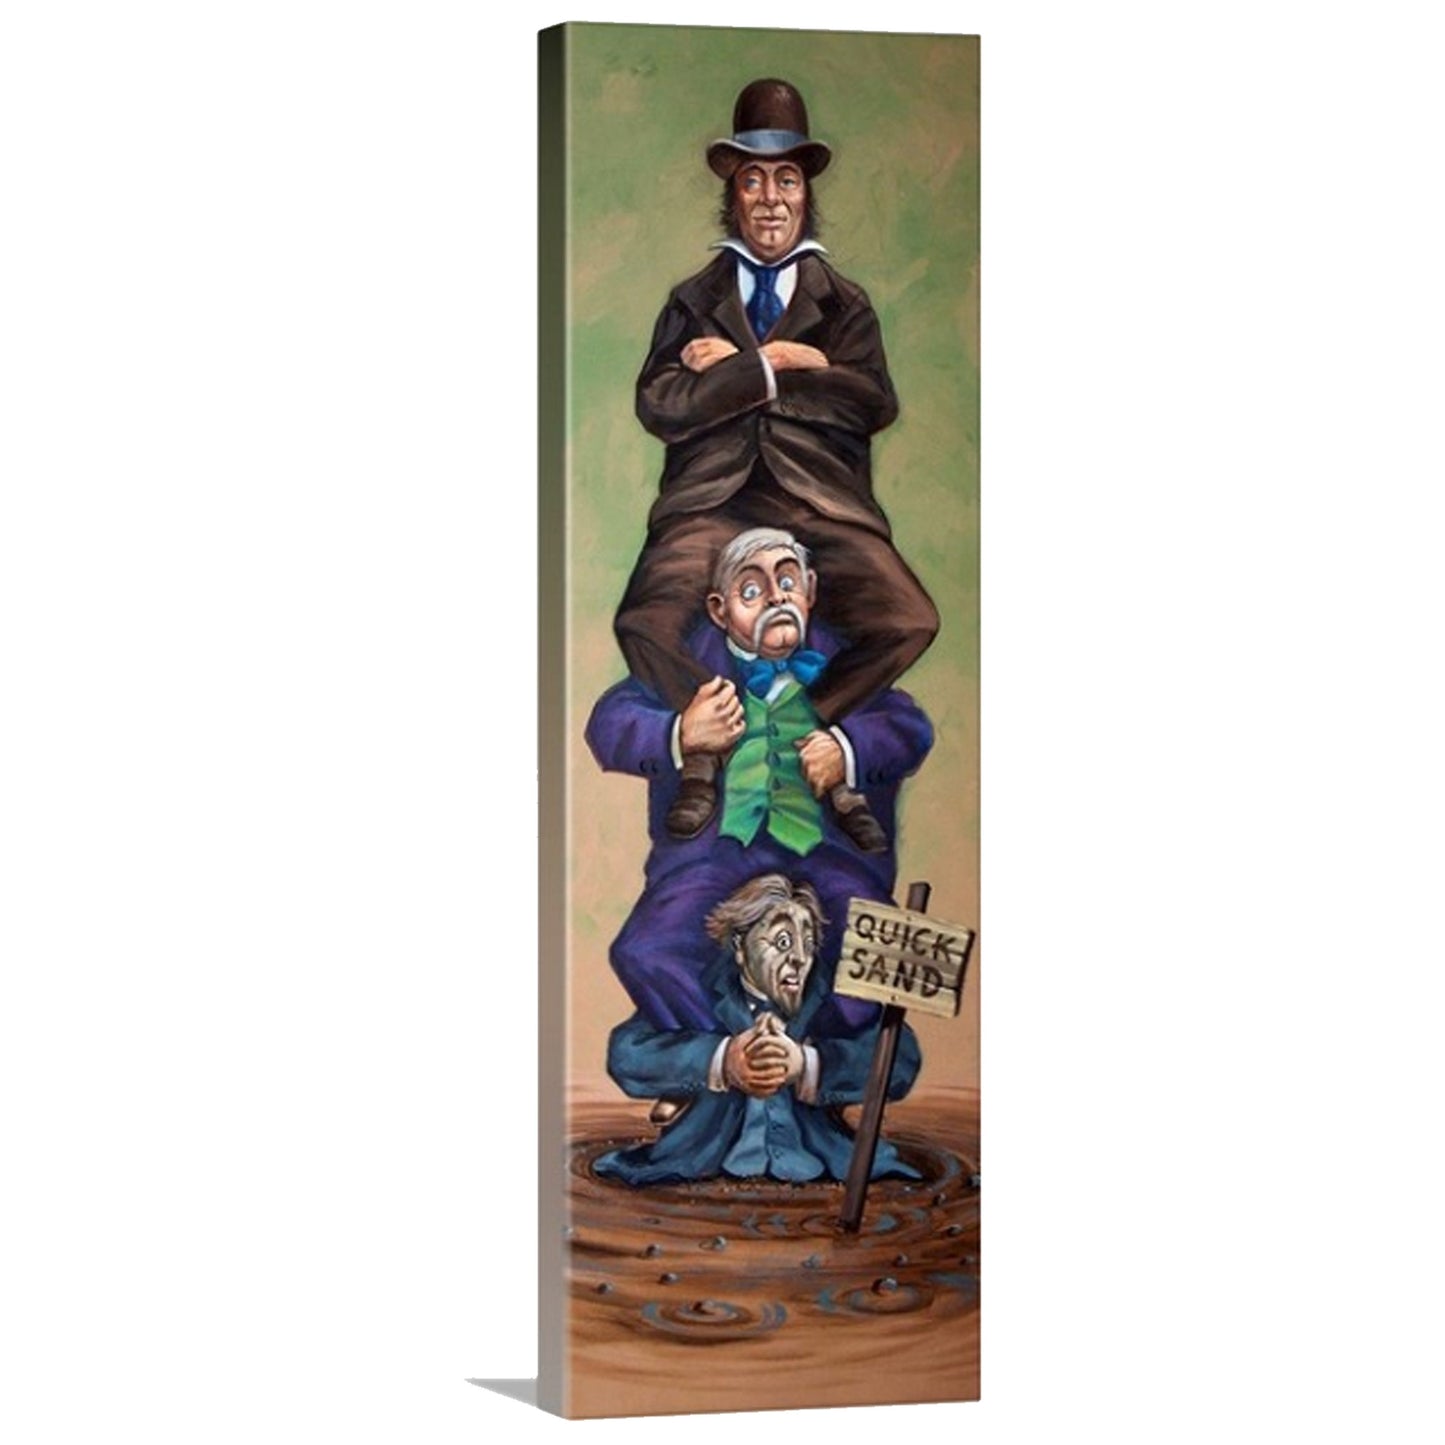 36"x12" Haunted Mansion Stretch Portraits - Individual - Haunted Mansion Inspired Stretching Paintings